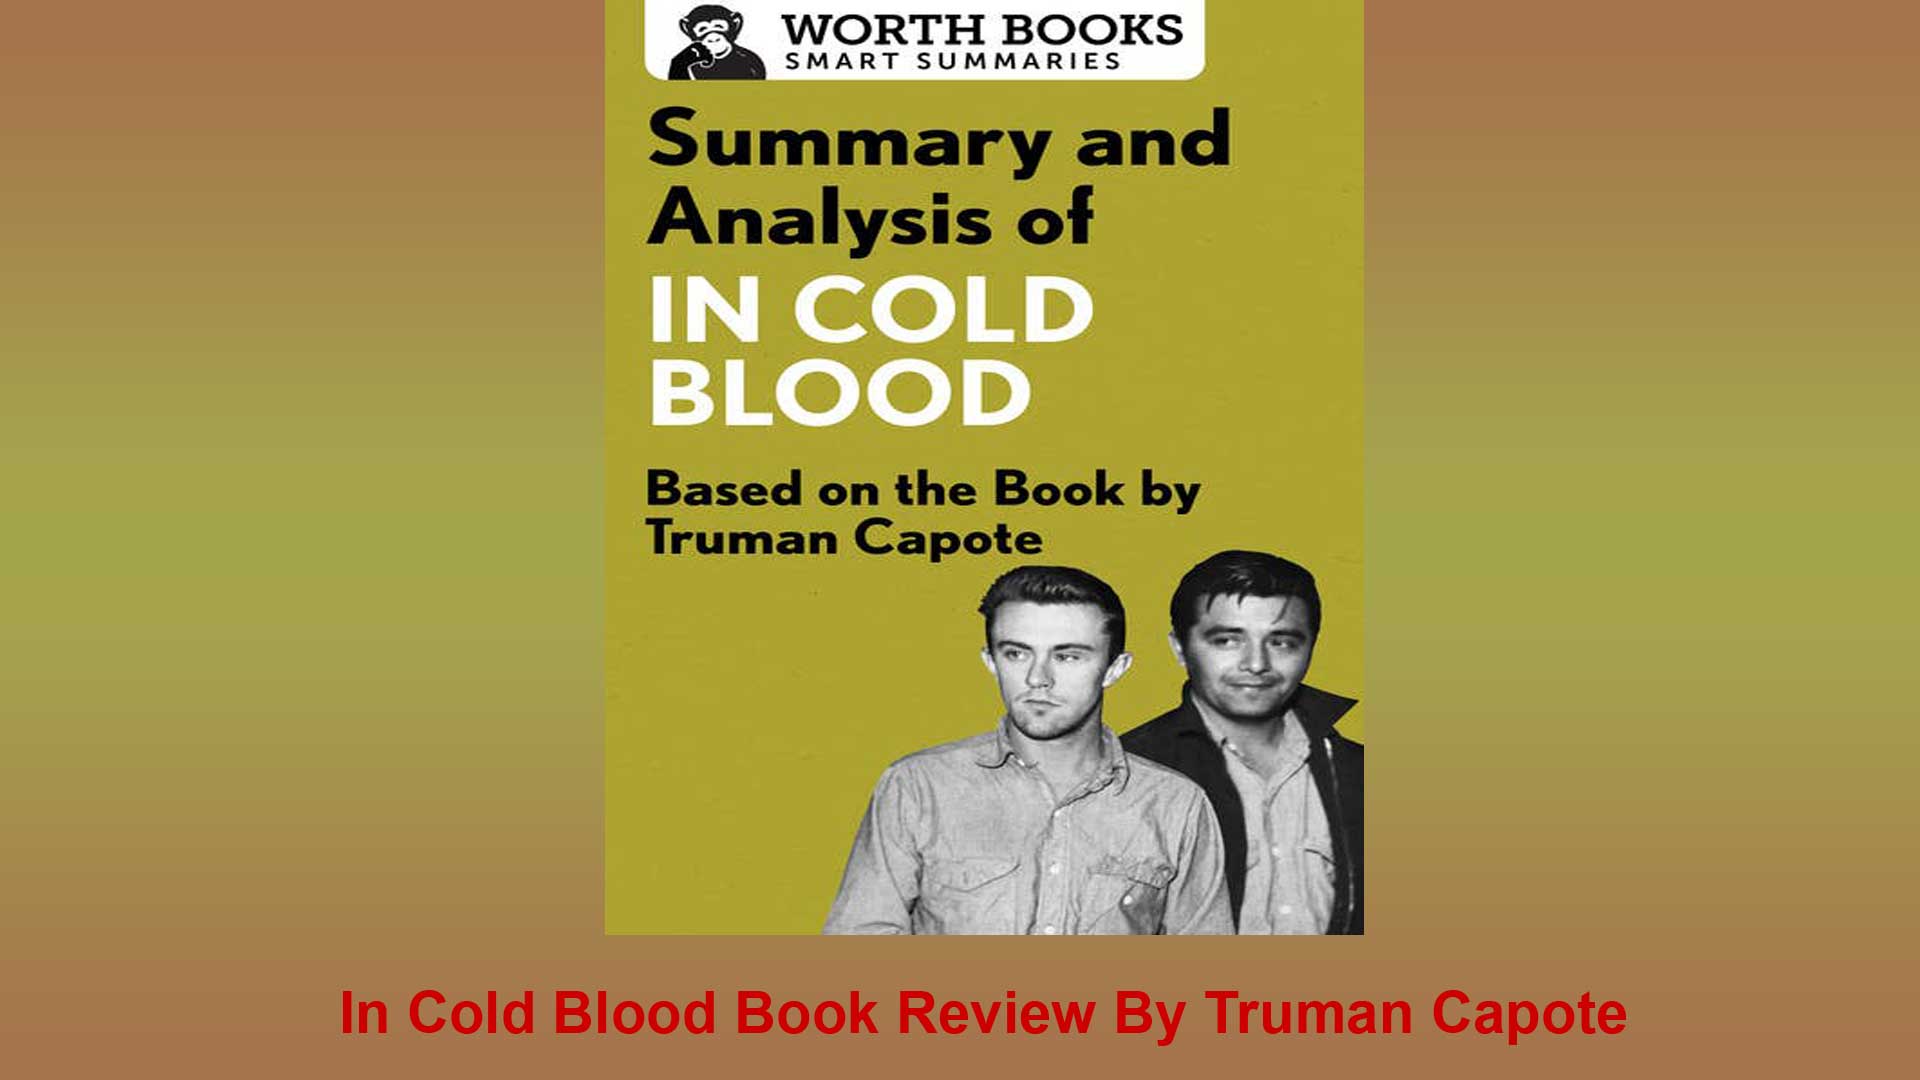 In Cold Blood Book Review Cover Image